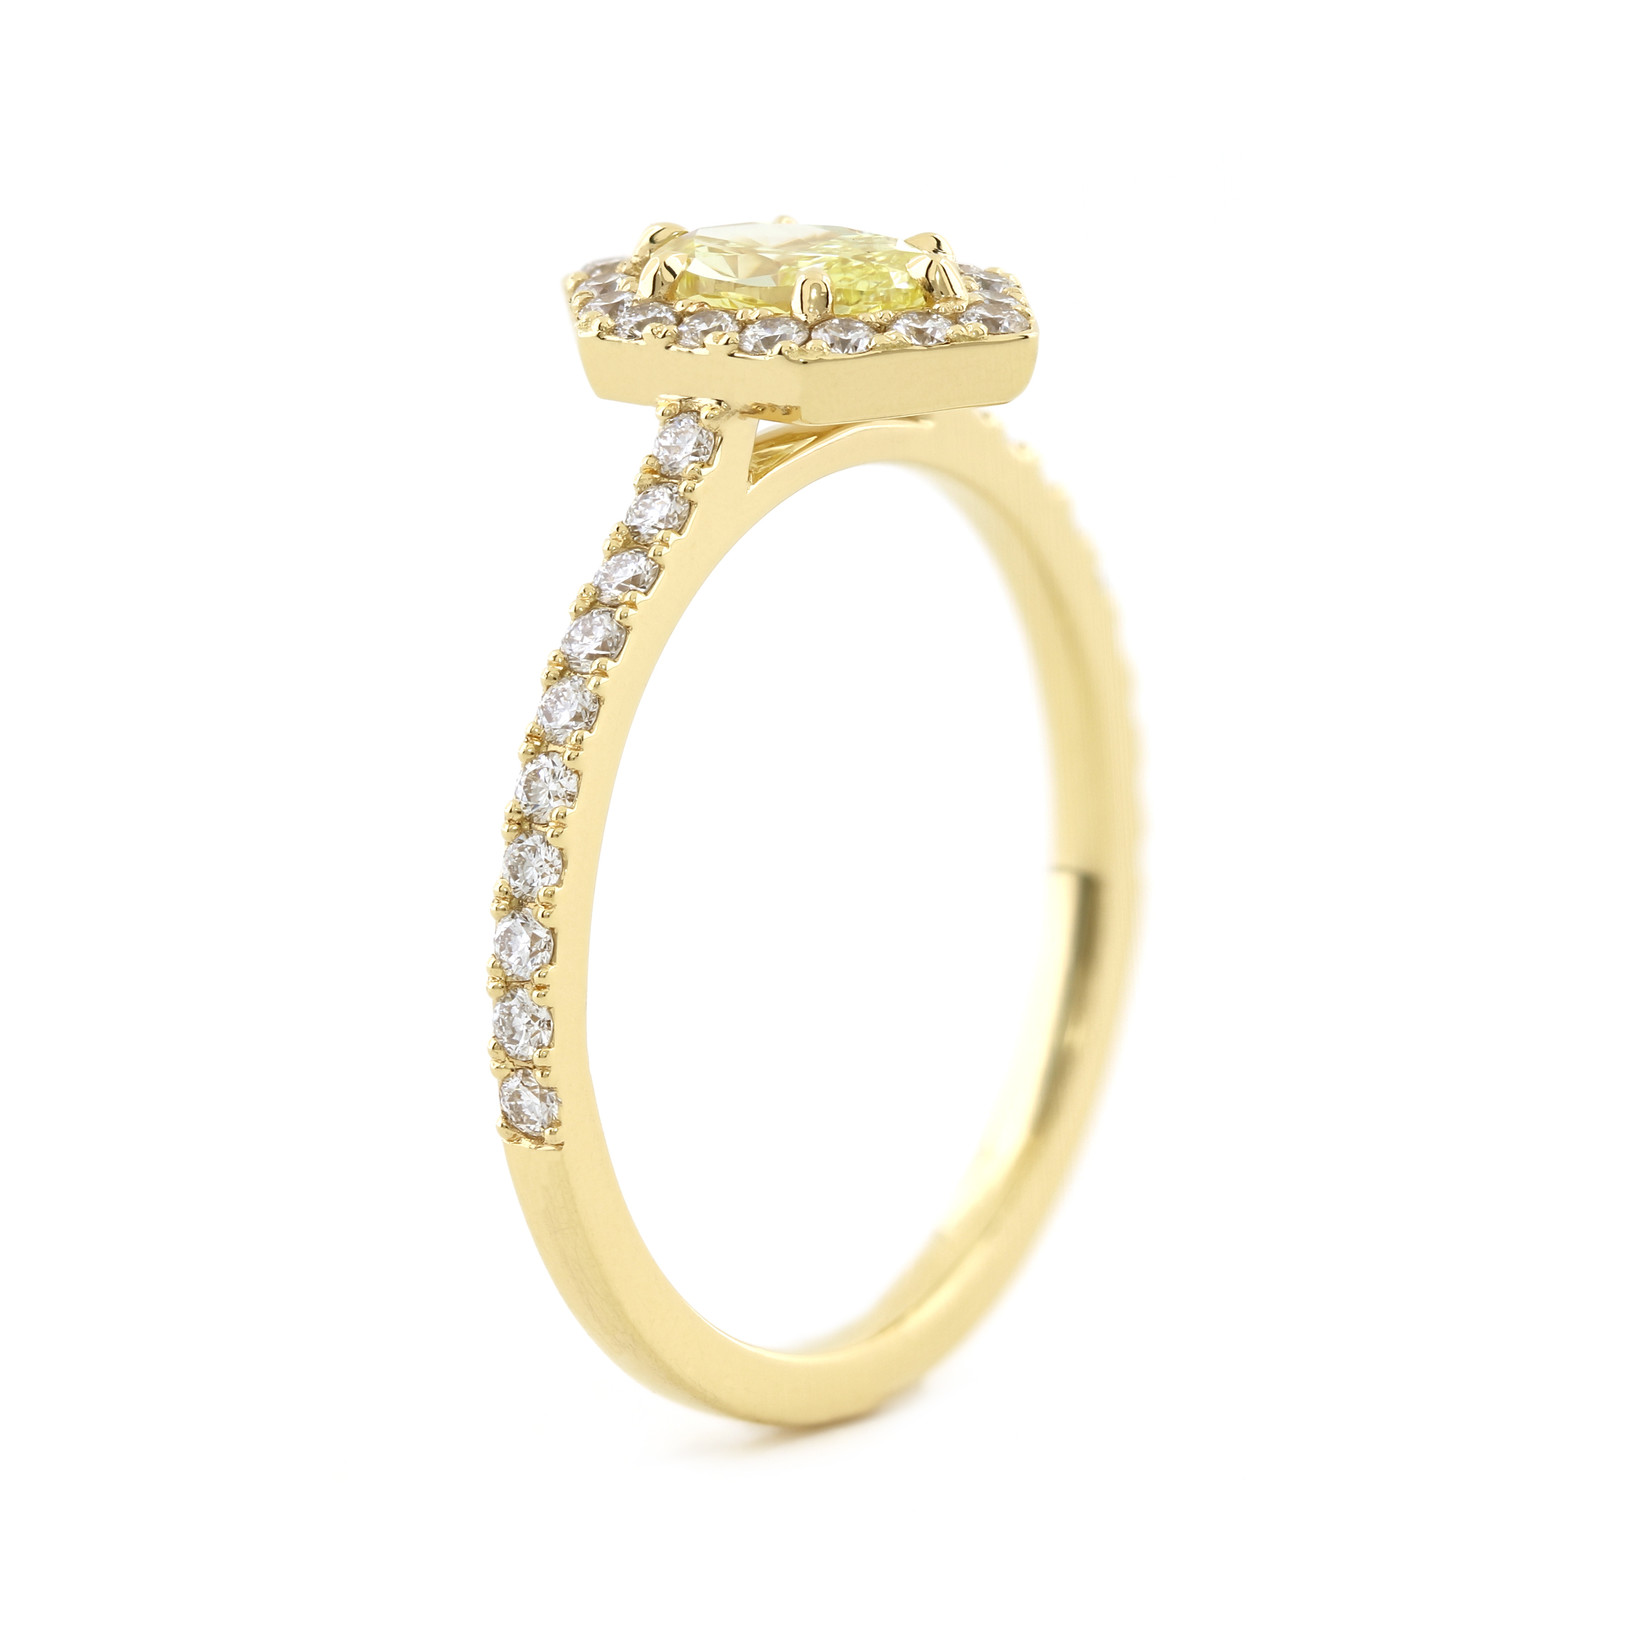 Baxter Moerman Hailey Ring with Oval Fancy Yellow Diamond